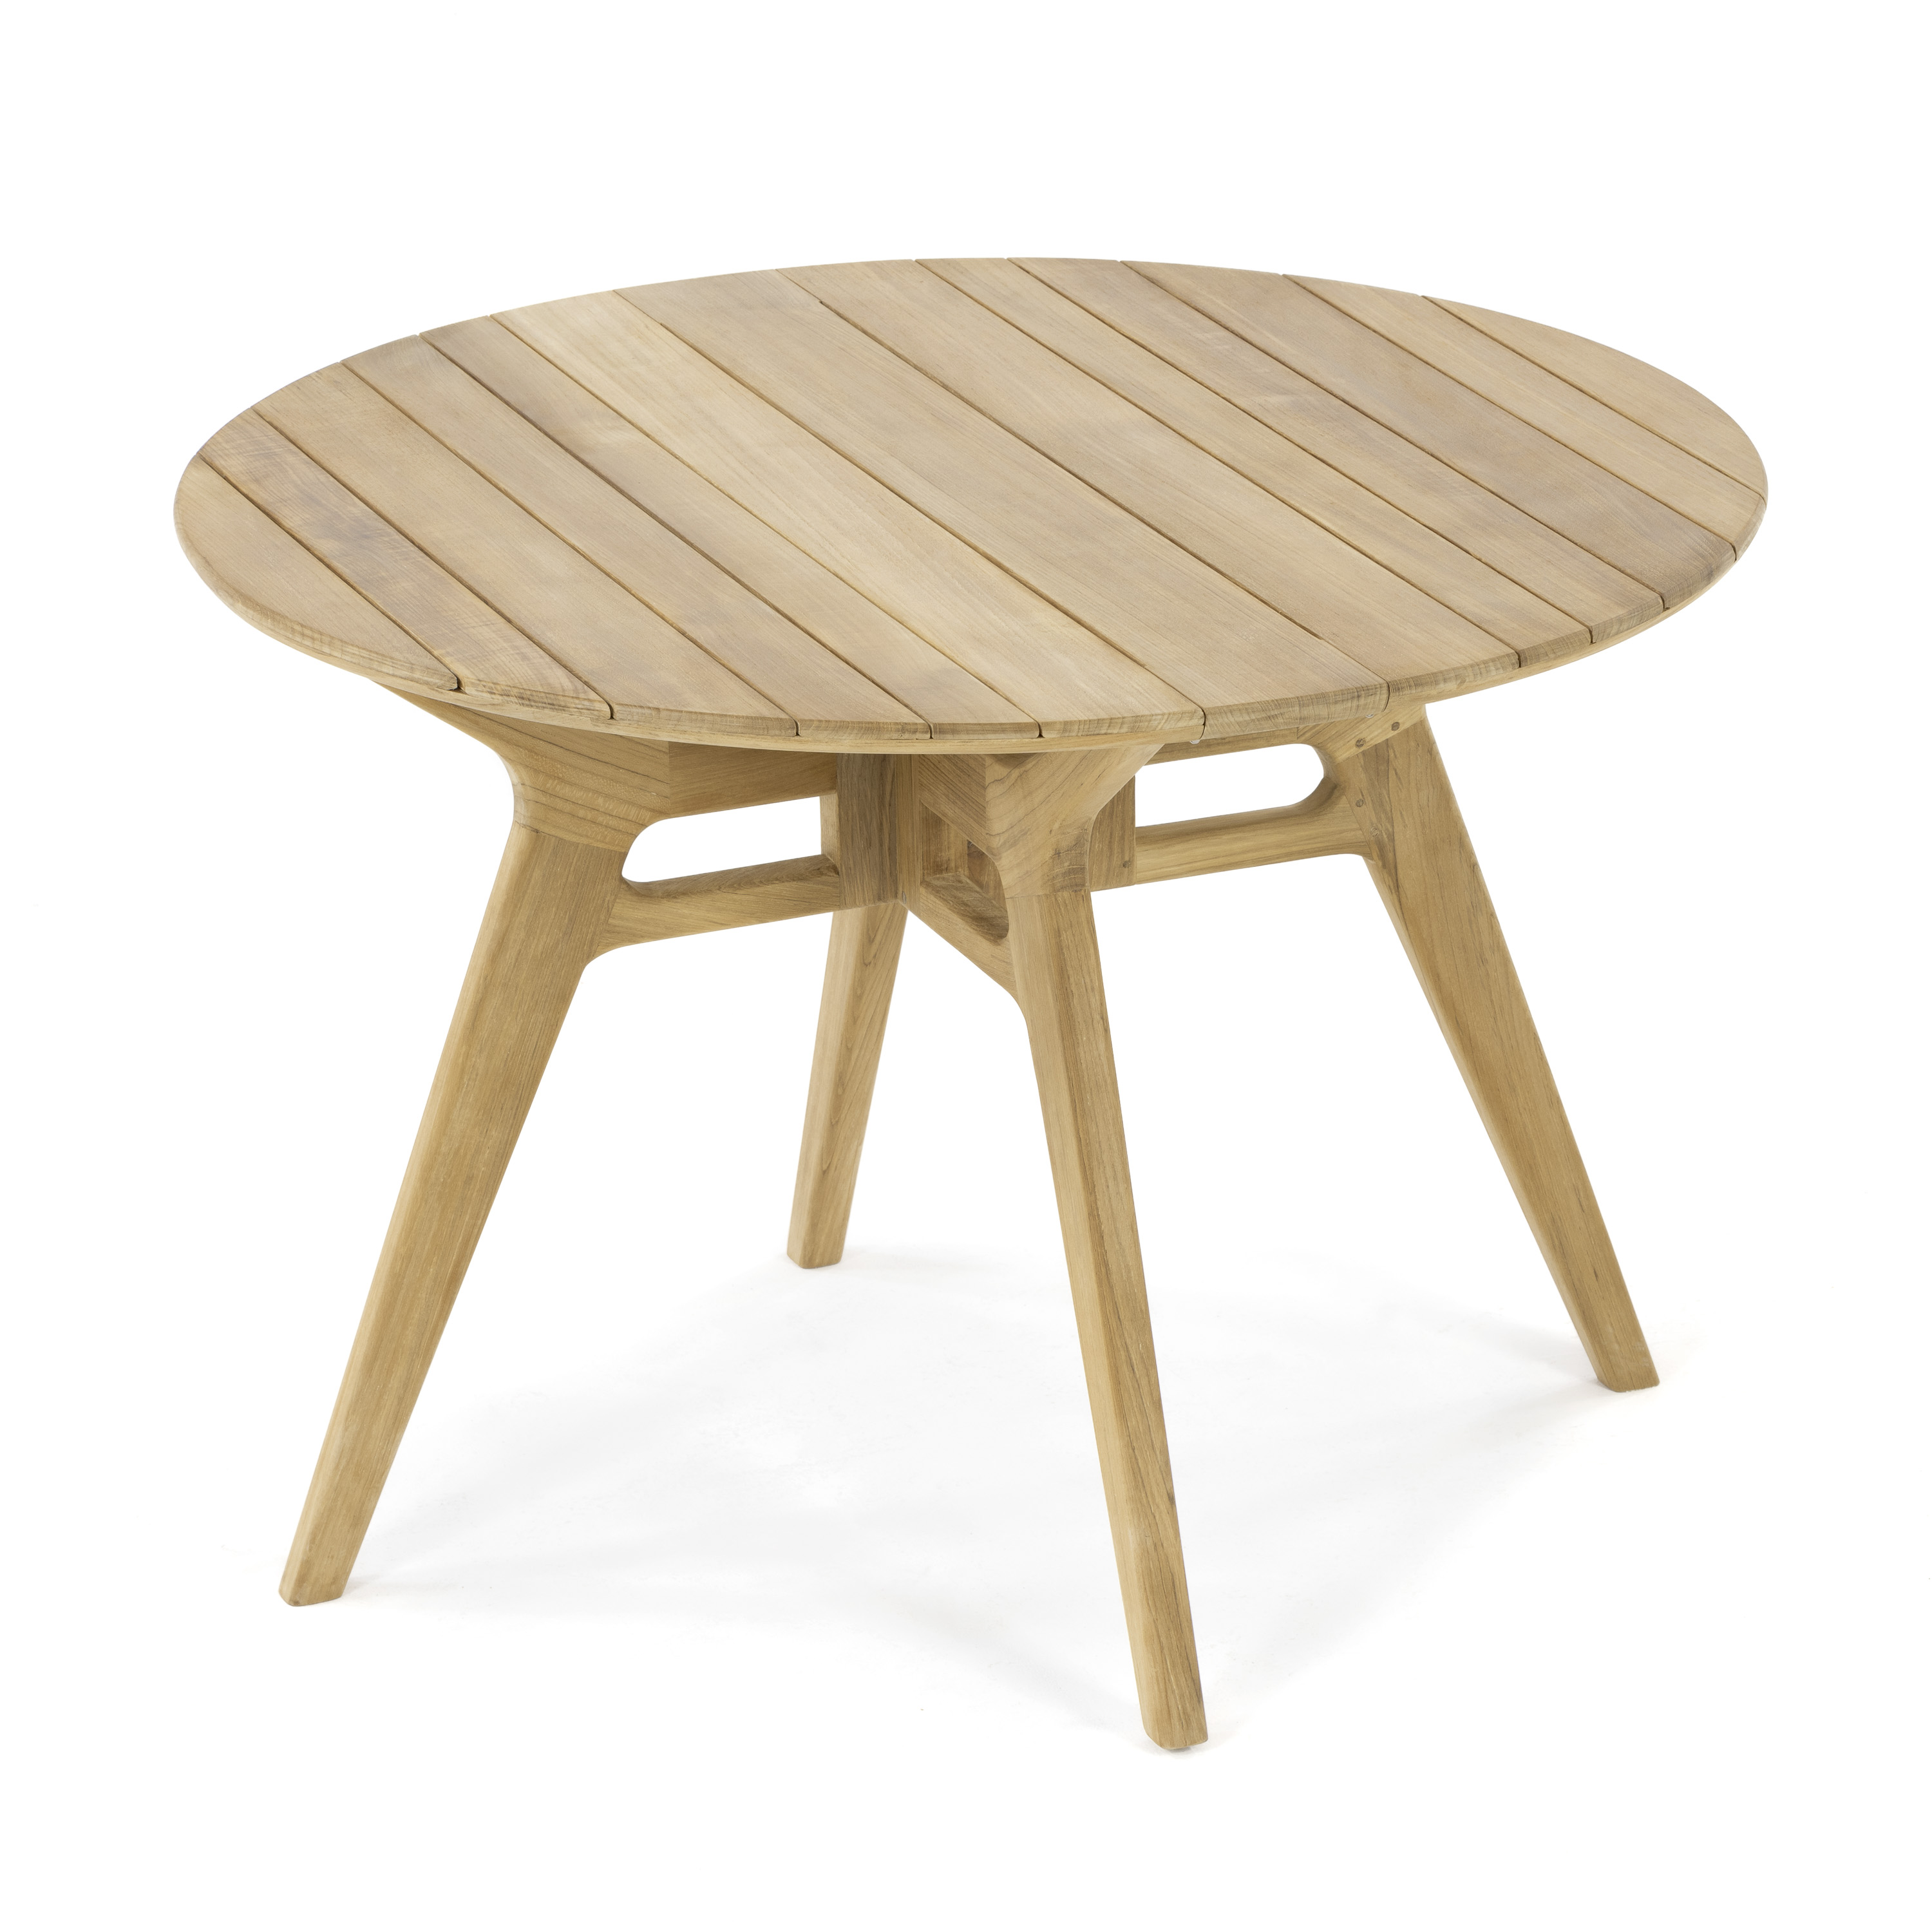 Surf 42 Inch Round Folding Drop Leaf, How Big Is A 42 Inch Round Table